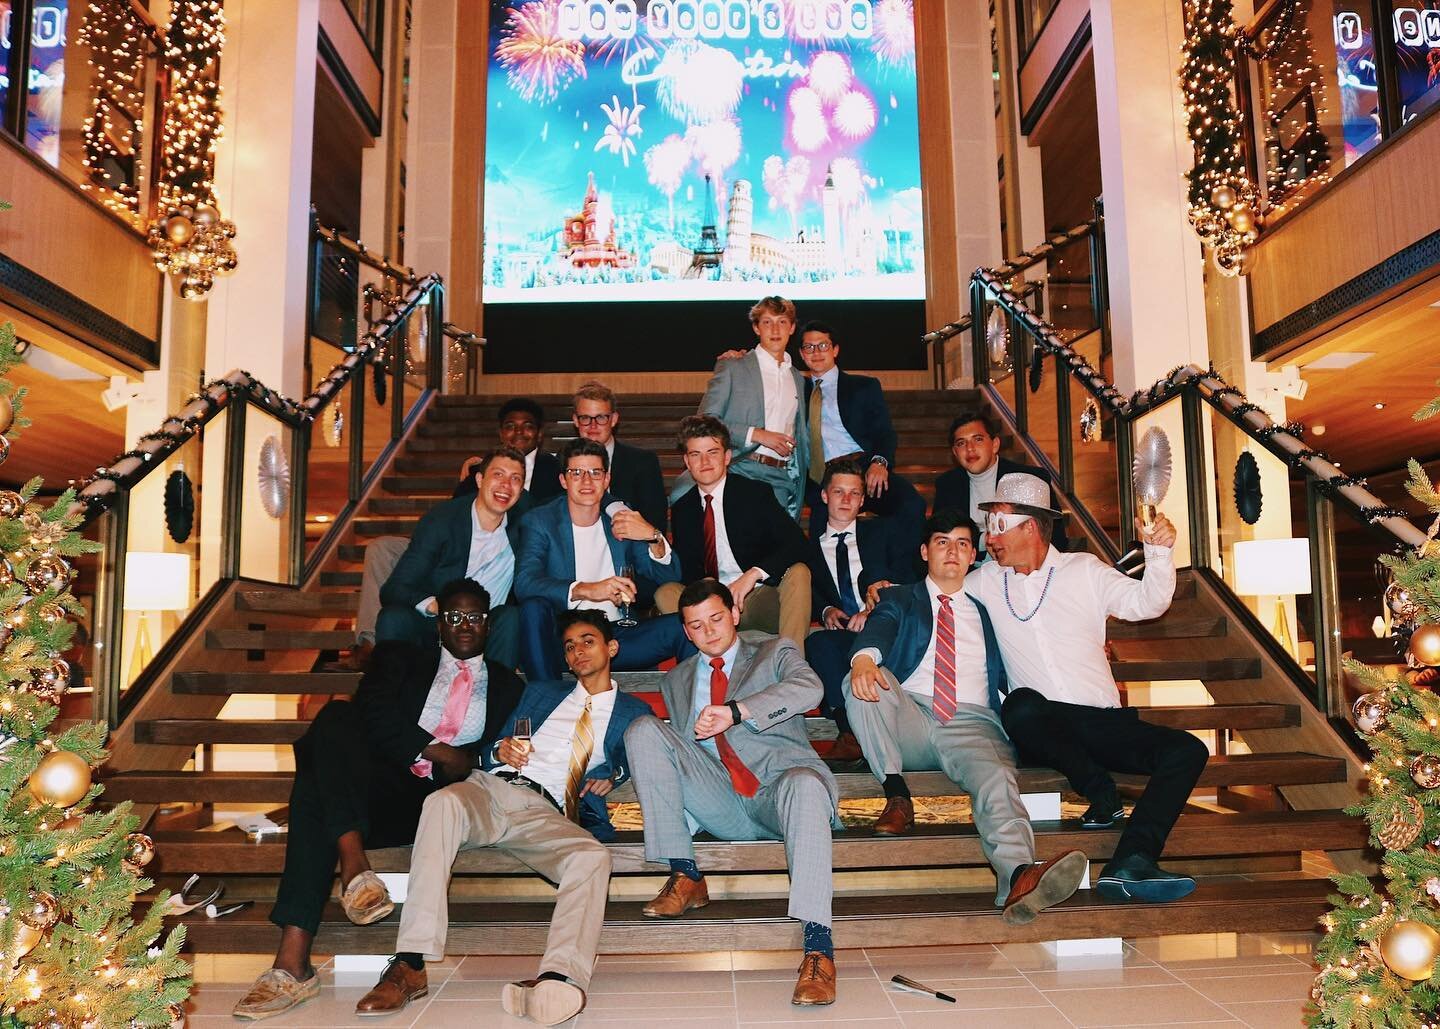 ✨tHe TiMe iS nOw✨ to audition for a cappella! The Virginia Gentlemen are accepting video auditions starting January 20th &ndash; link in bio for more info!